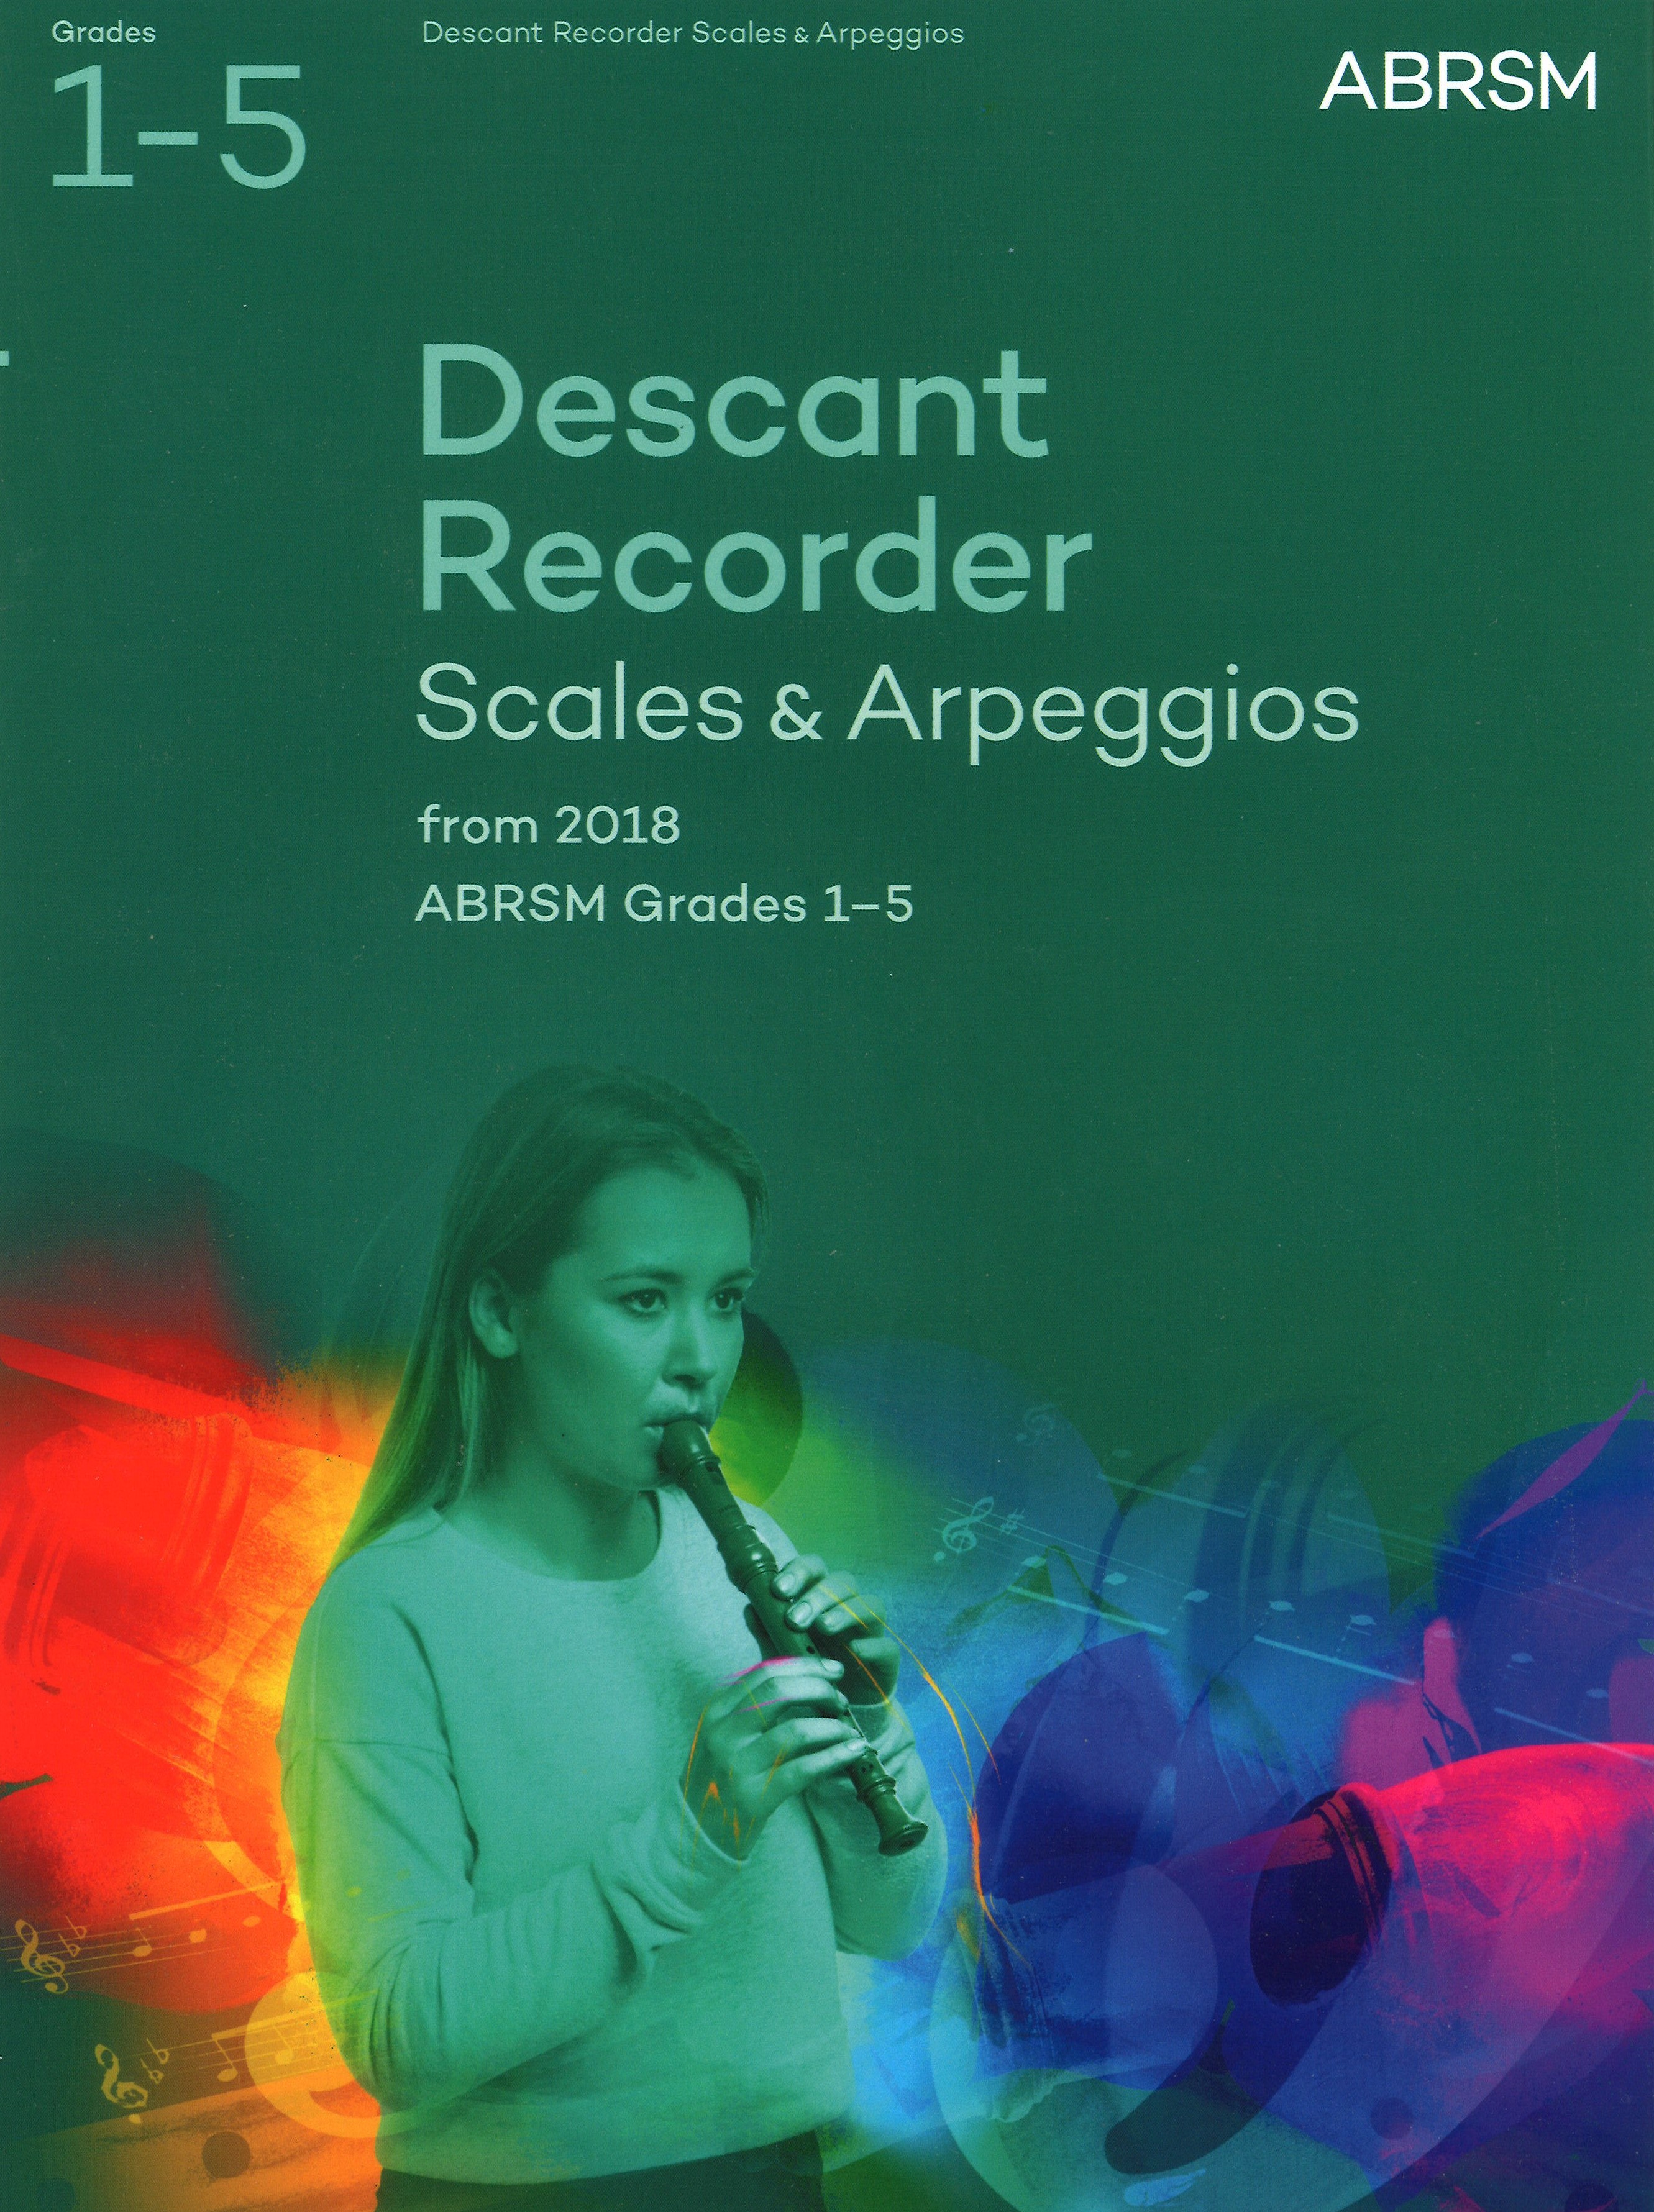 Descant Recorder Scales & Arp Gr 1-5 2018 Abrsm Sheet Music Songbook